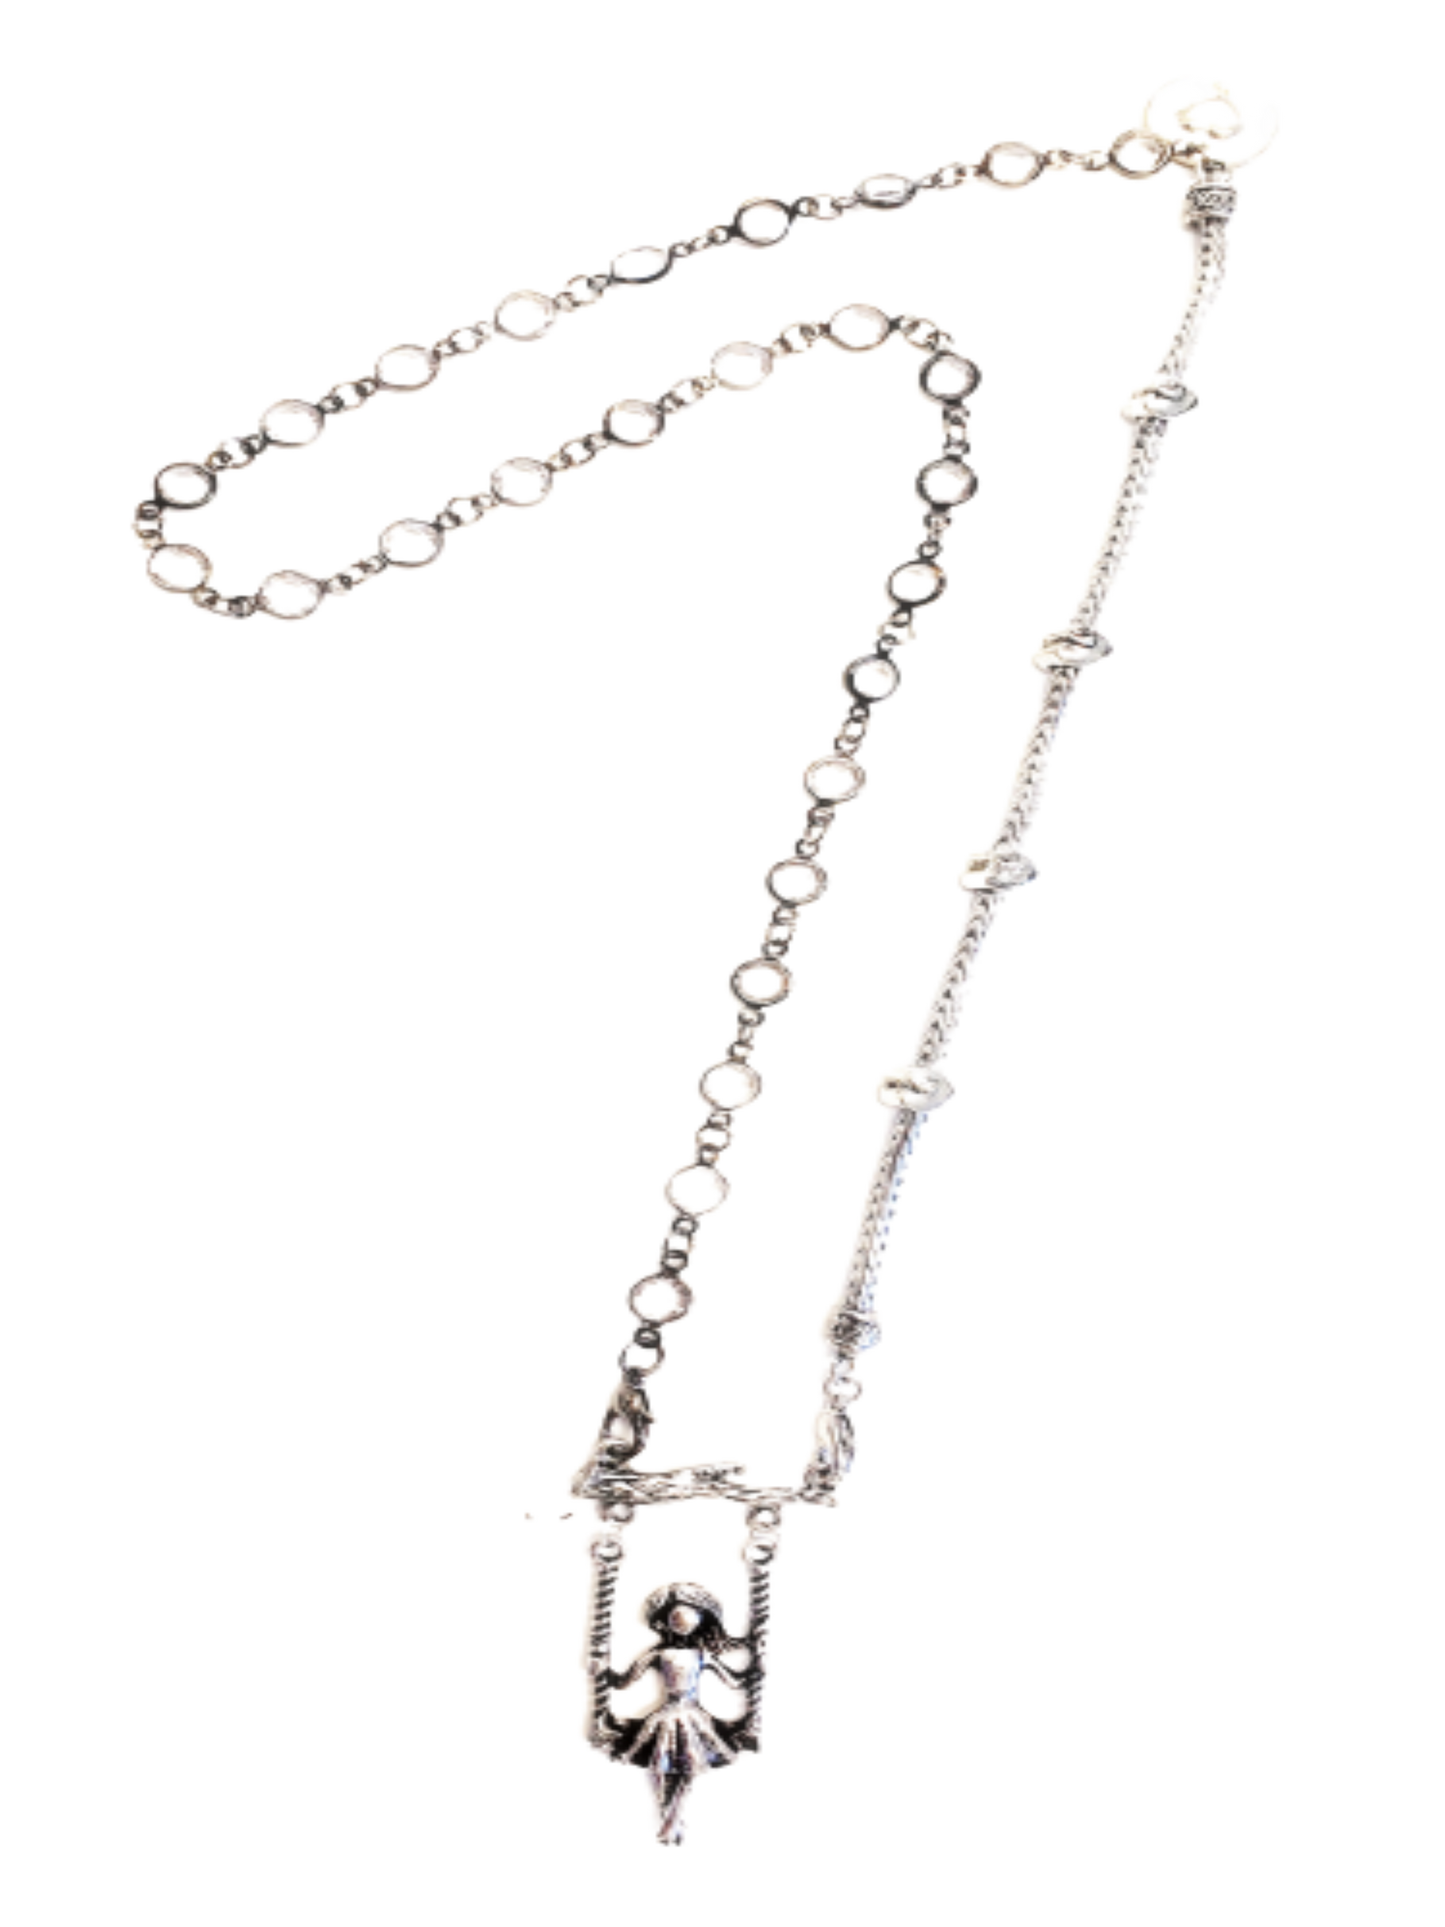 Swinging In The Rain - Chain Necklace